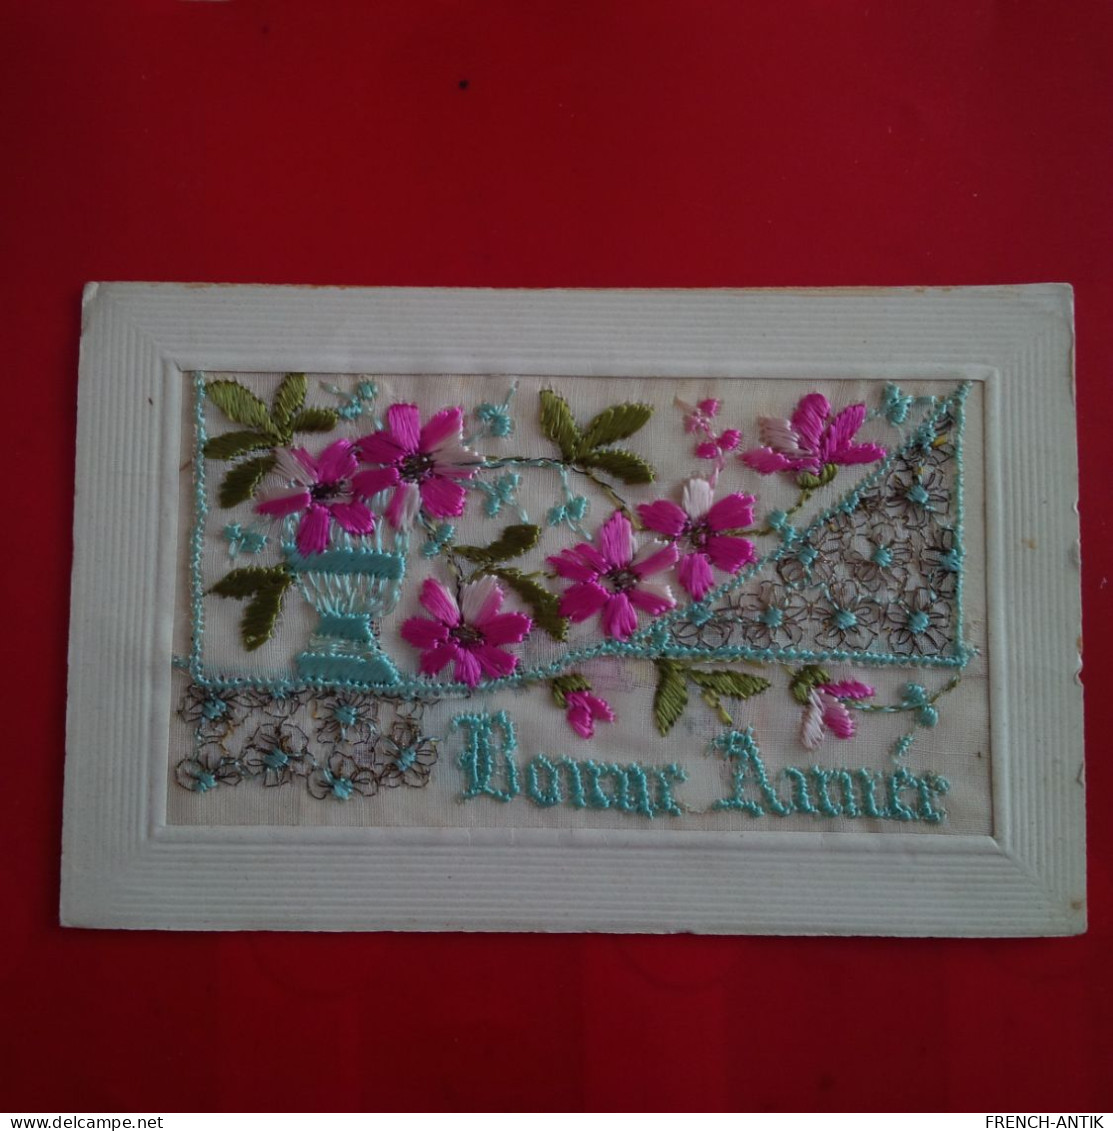 CARTE BRODEE BONNE ANNEE - Embroidered